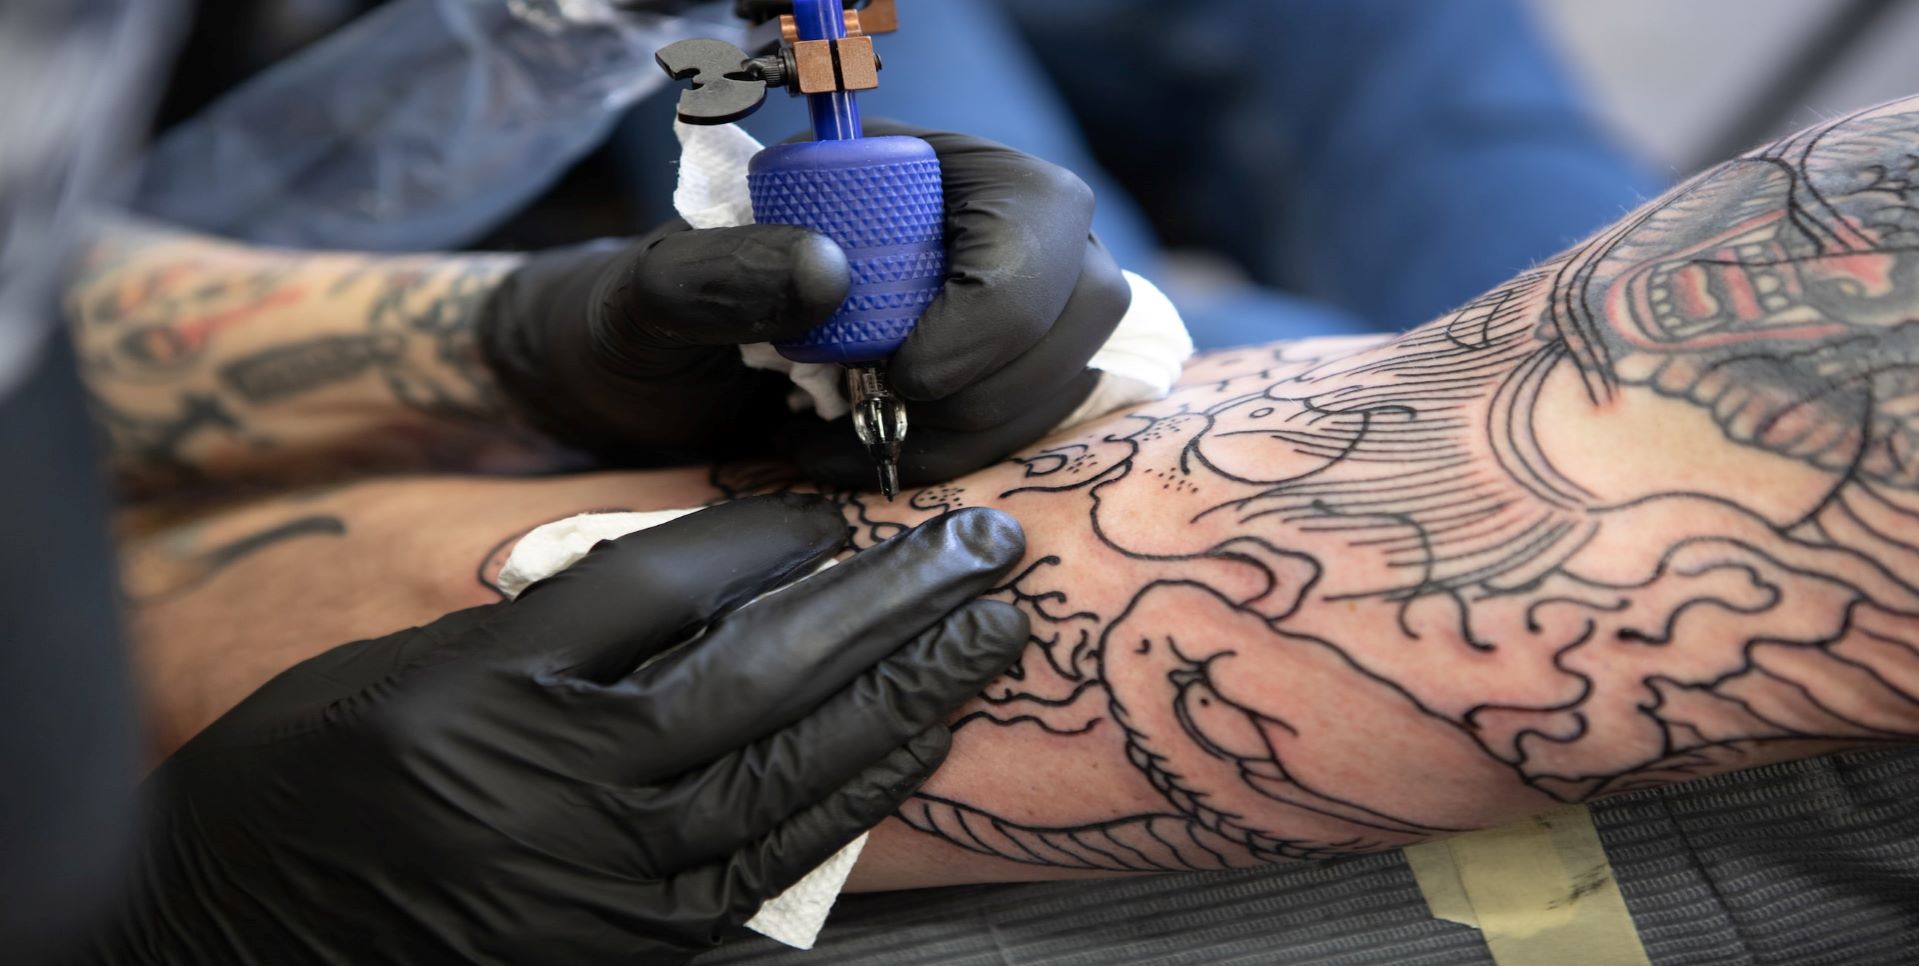 Man getting a tattoo on his arm.